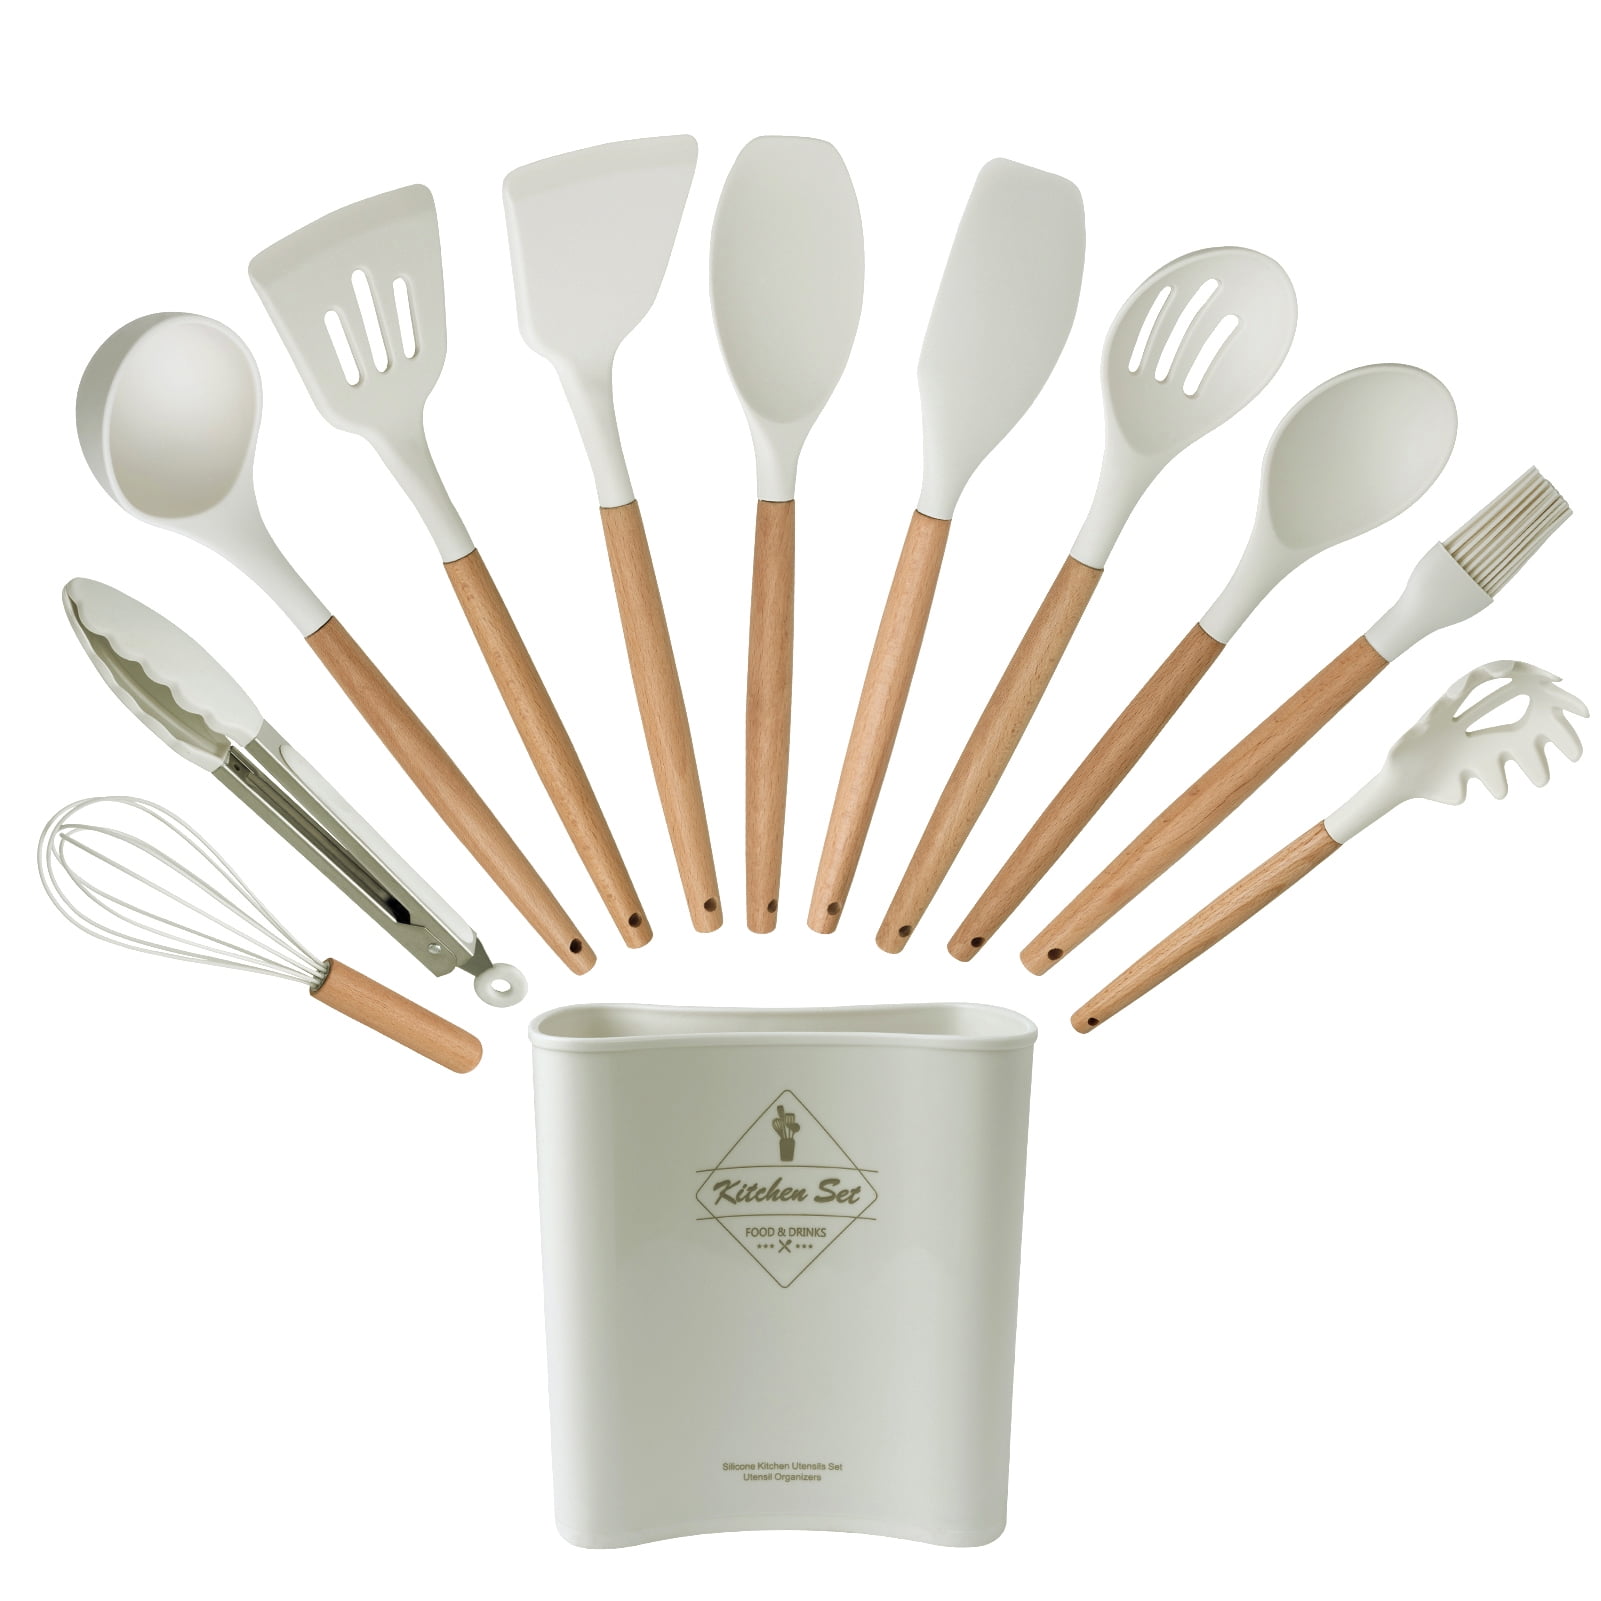 Home and Away - 21 Piece Silicone Baking Set. Get yours now while stocks  last 🍰🧁🛍 Visit our website for more info. Features: - 1x Bundt Pan - 1x  12 Hole Mini